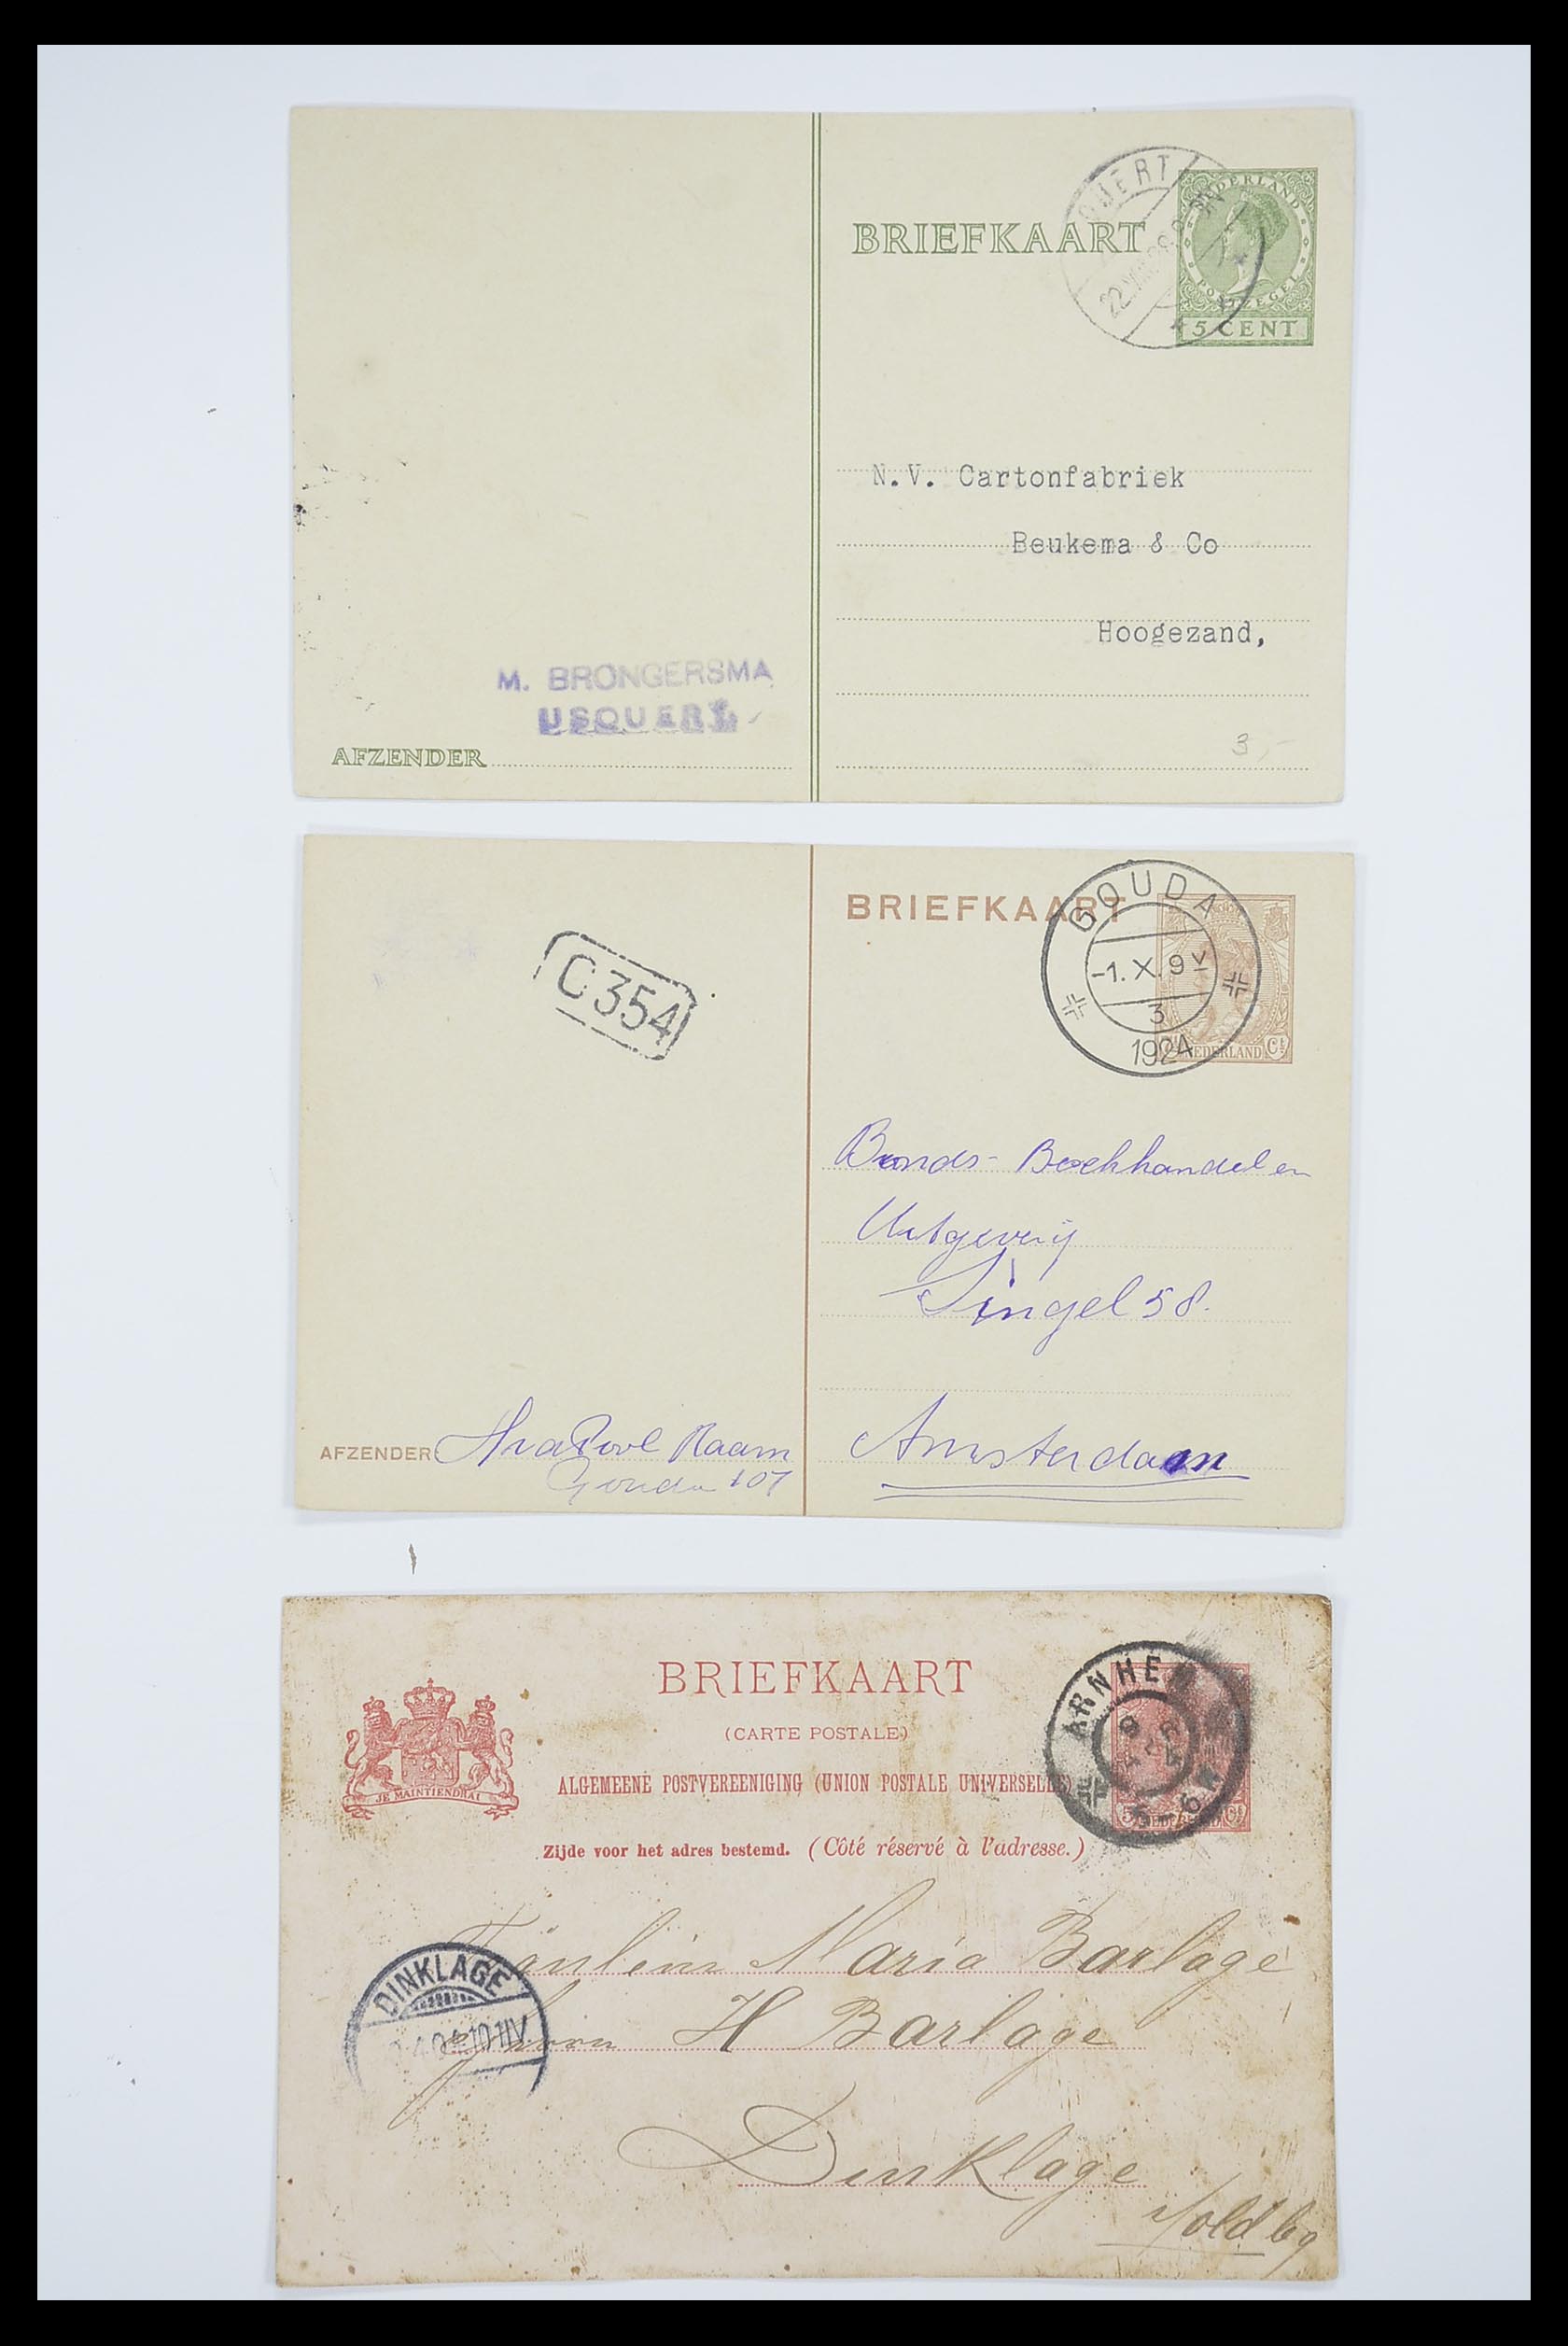 33536 008 - Stamp collection 33536 Netherlands covers 1800-1950.